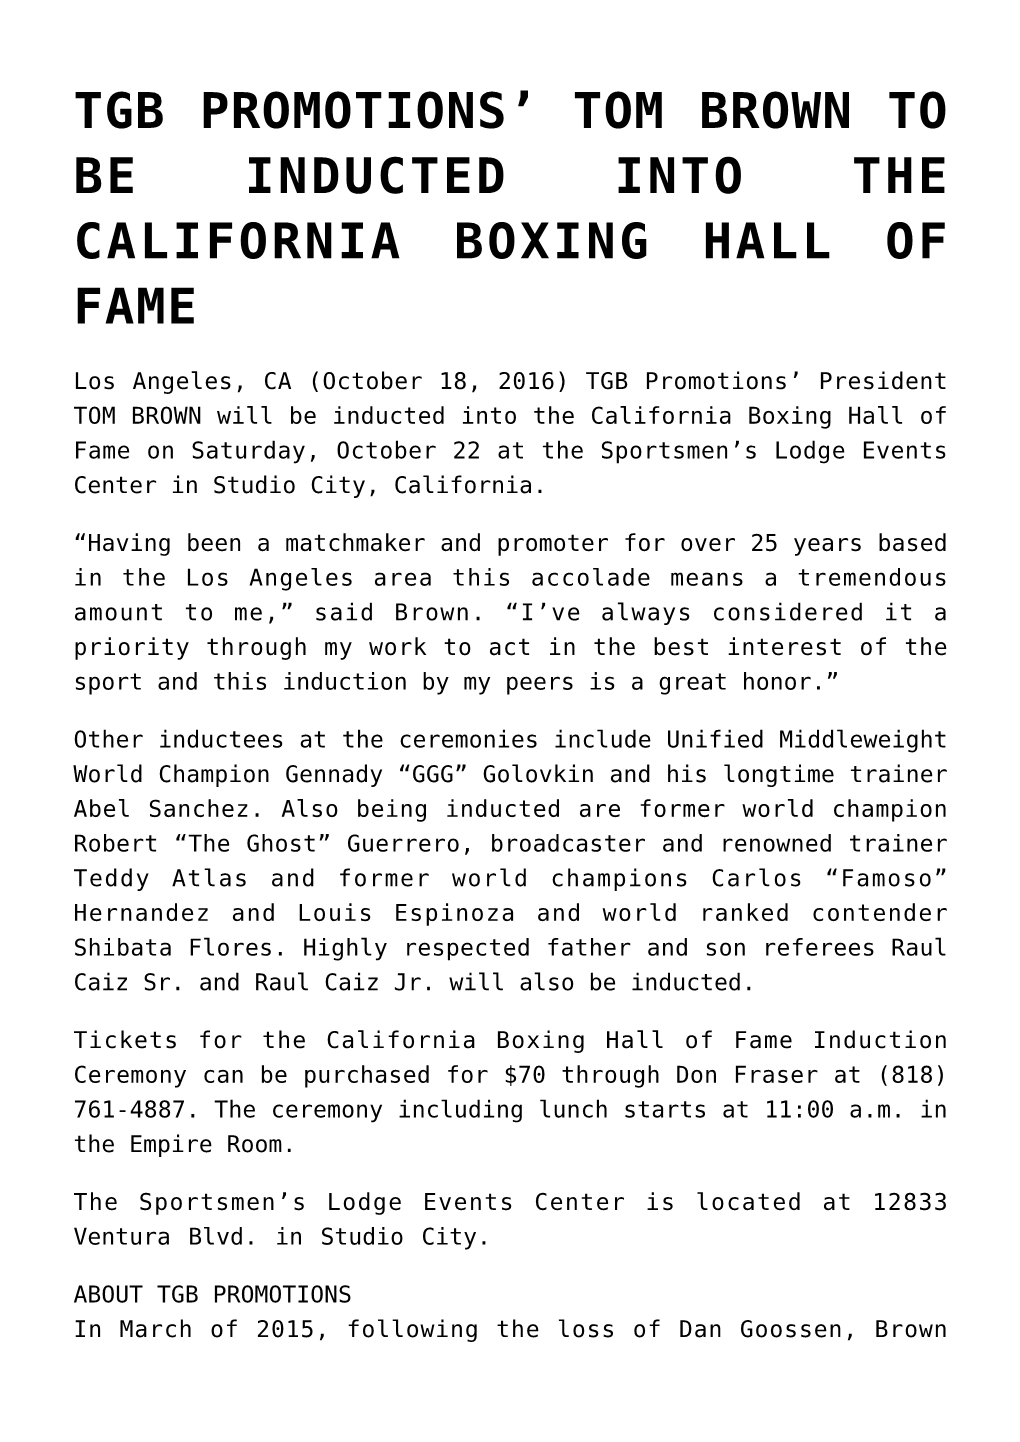 Tom Brown to Be Inducted Into the California Boxing Hall of Fame